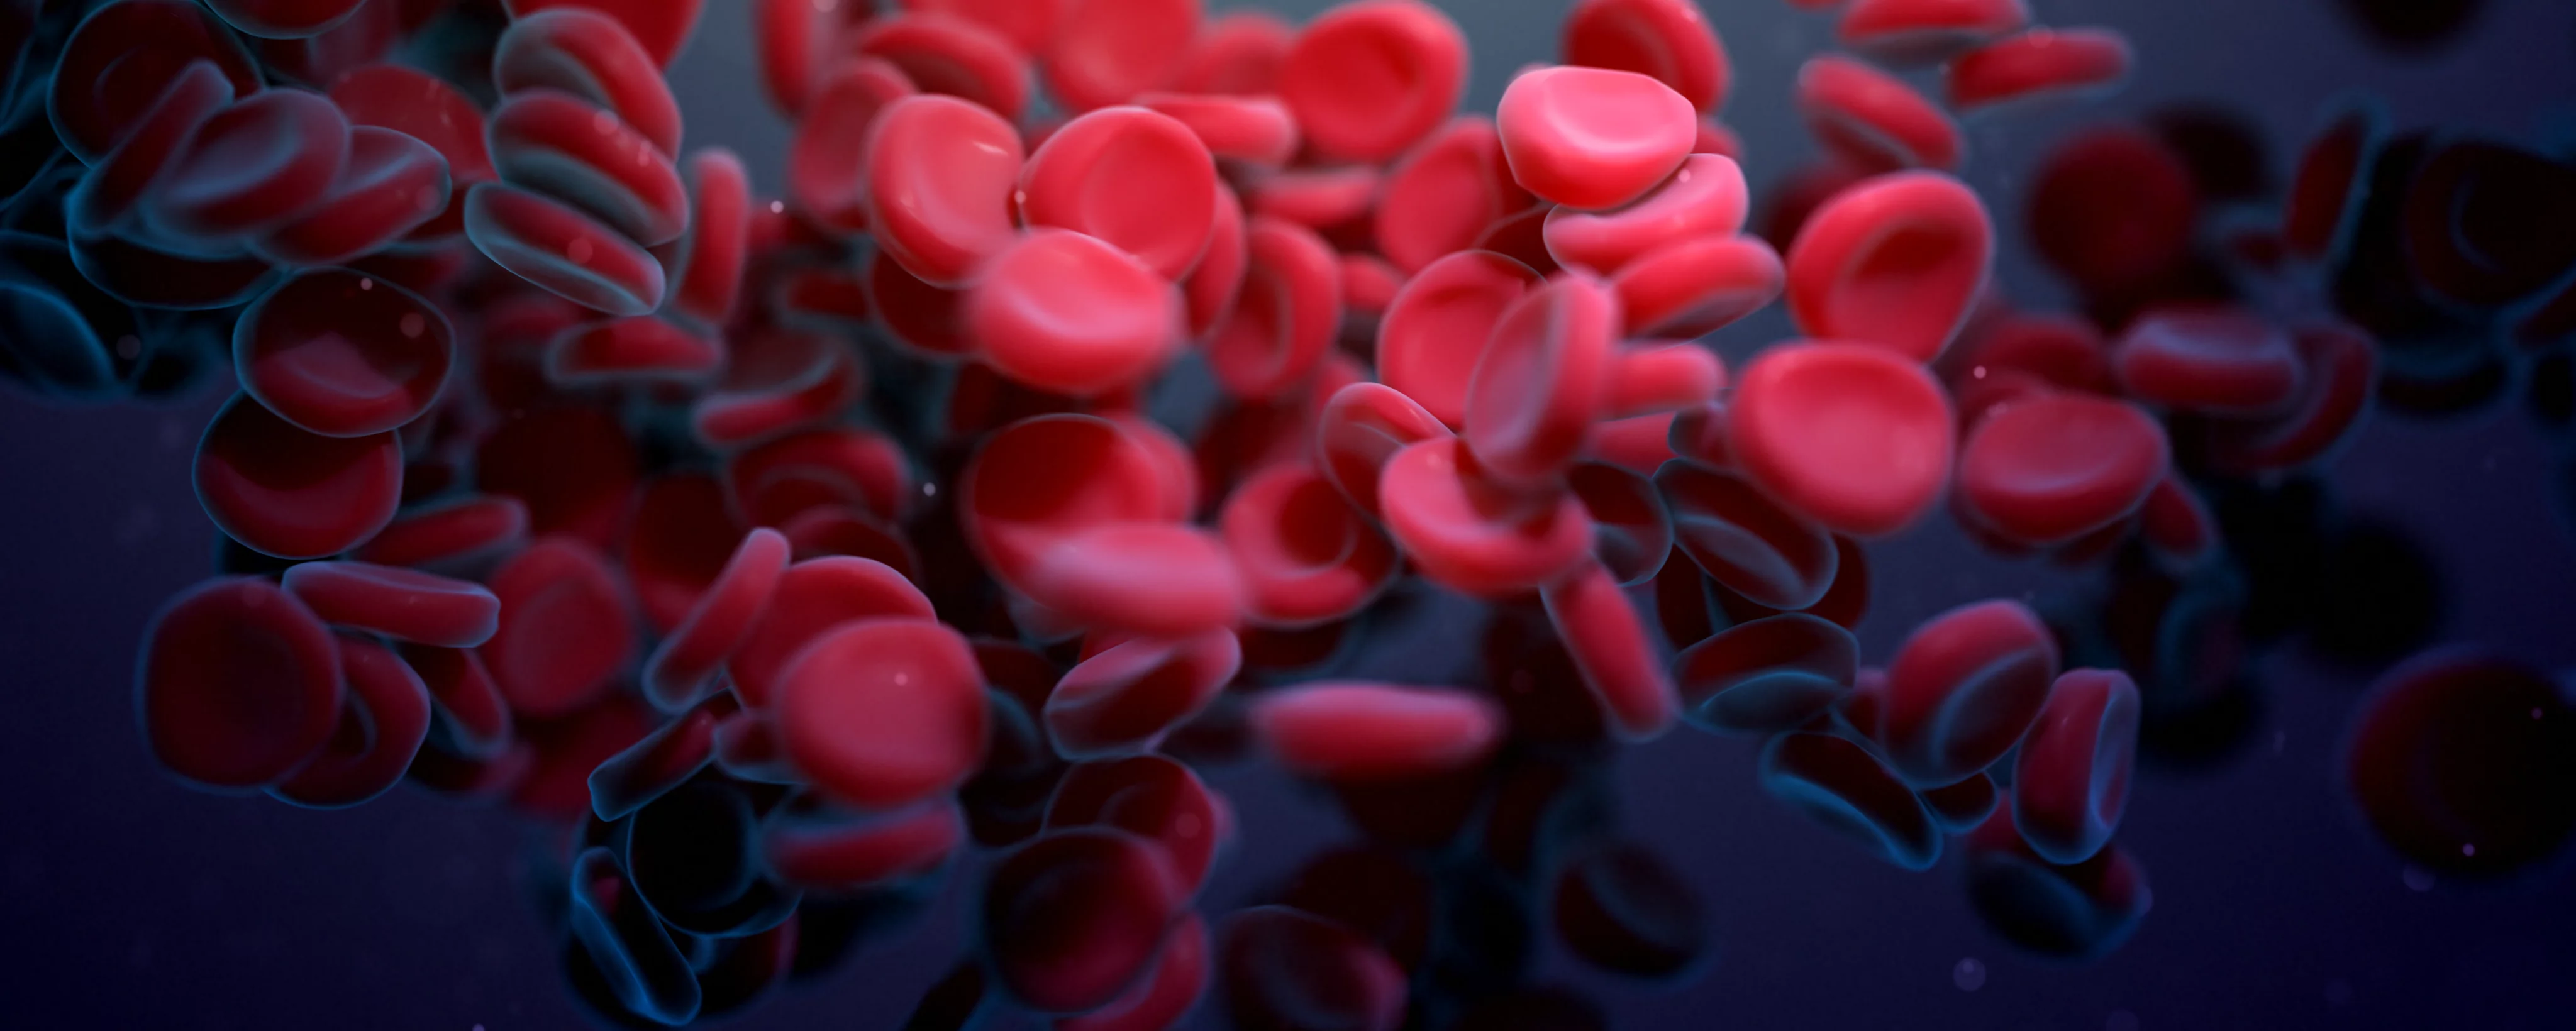 3d image showing red blood cells clumping and flowing together showing blood flow.